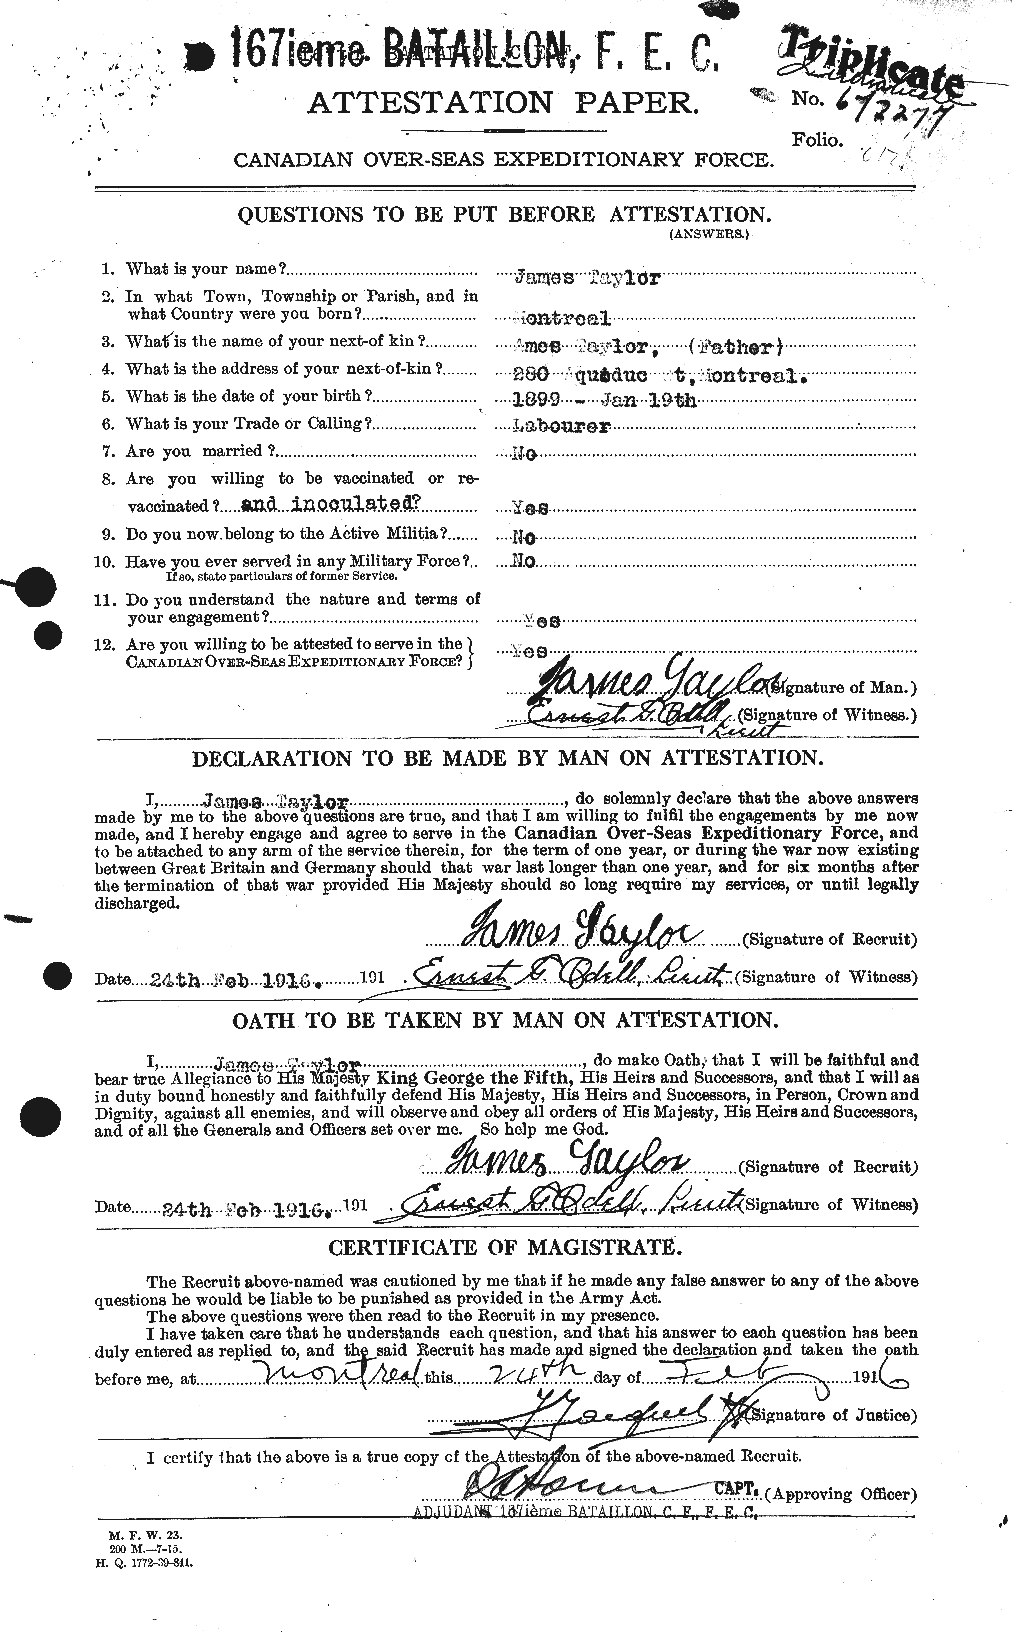 Personnel Records of the First World War - CEF 626689a